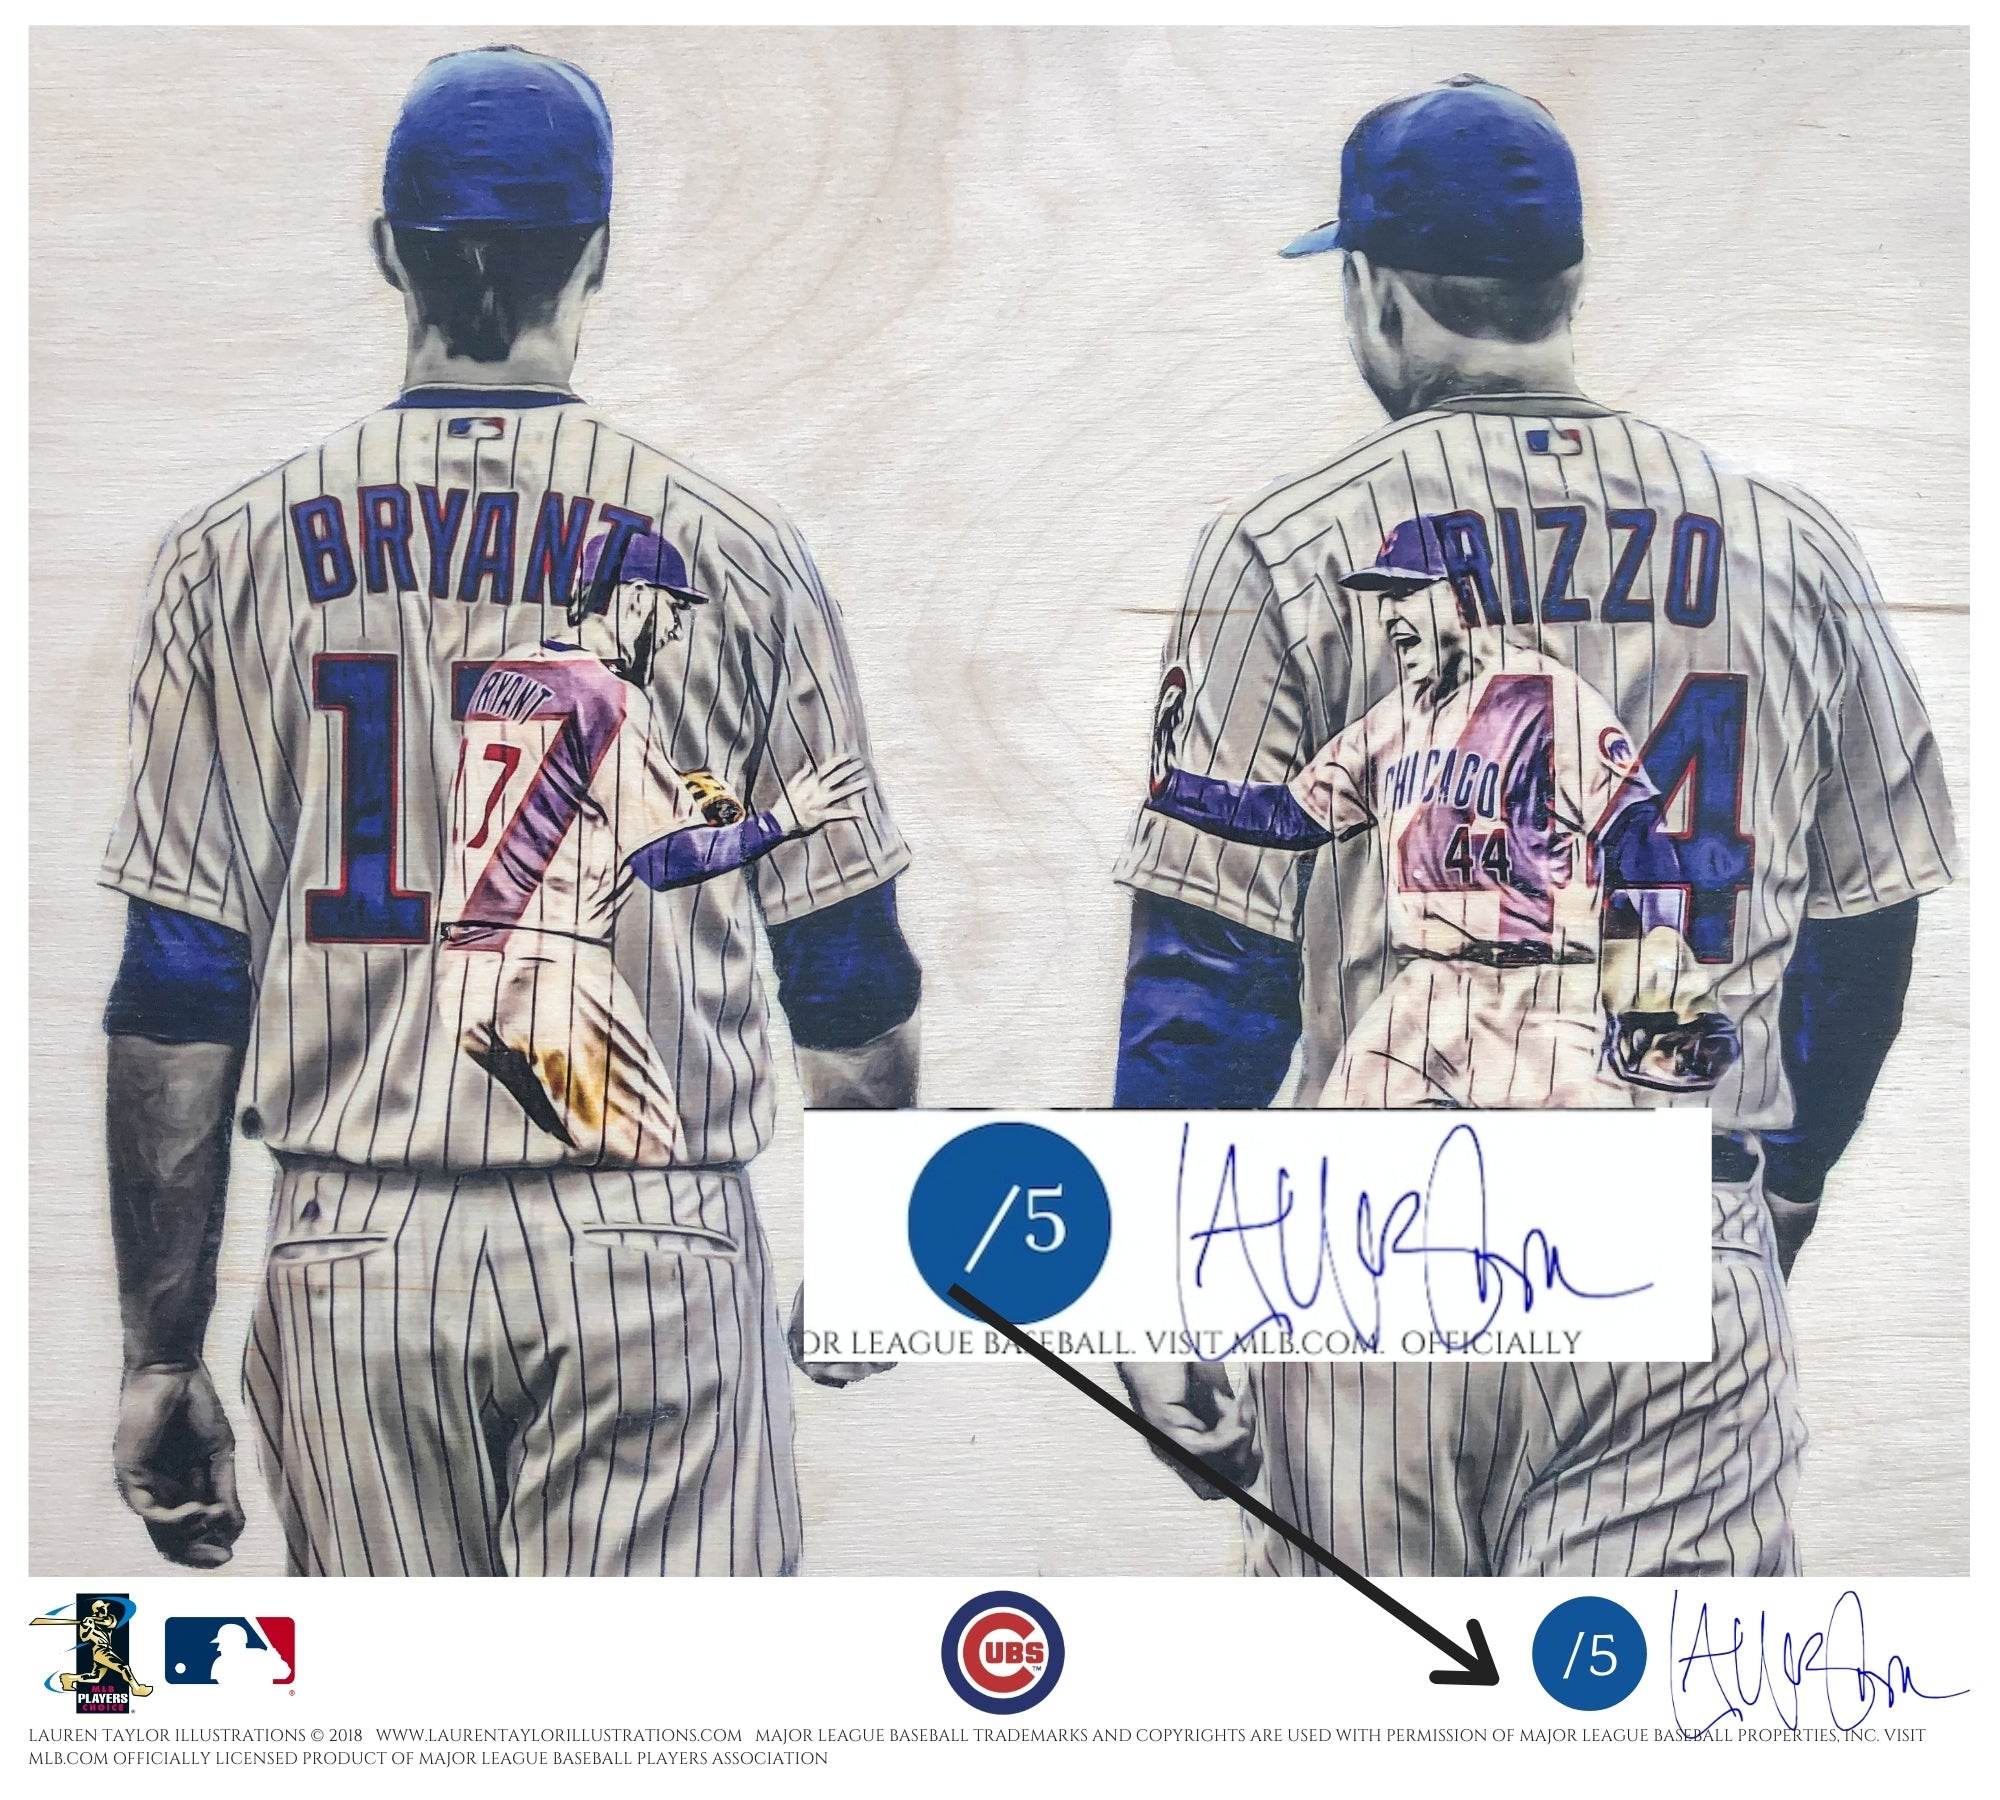 #Bryzzo  Chicago cubs baseball, Cubs team, Cubs players